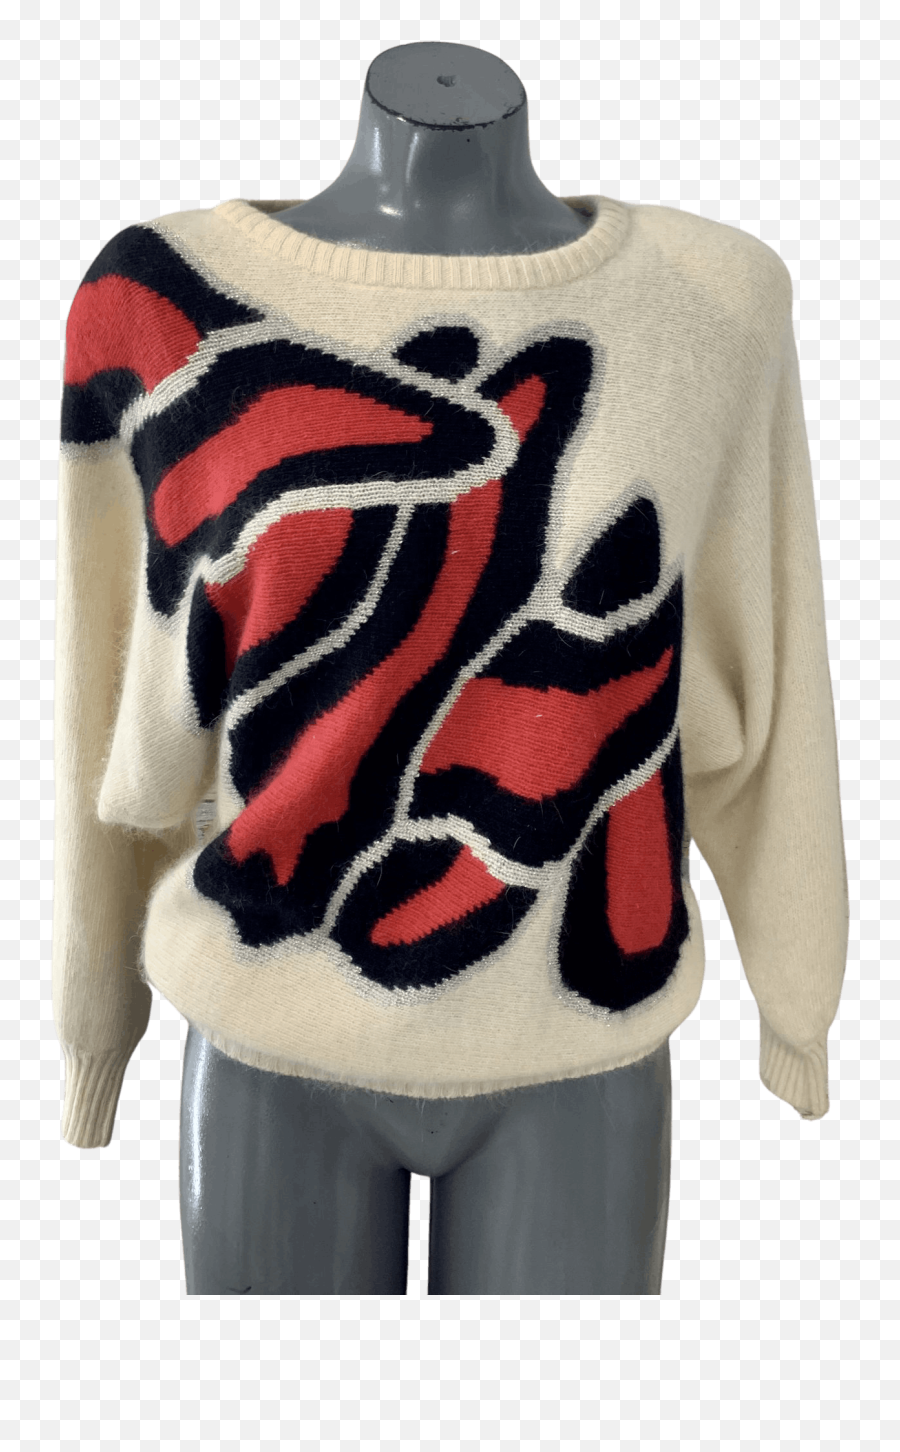 Vintage 80s Printed Sweater - Long Sleeve Emoji,Mixed Emotions Multi Colored Sweater